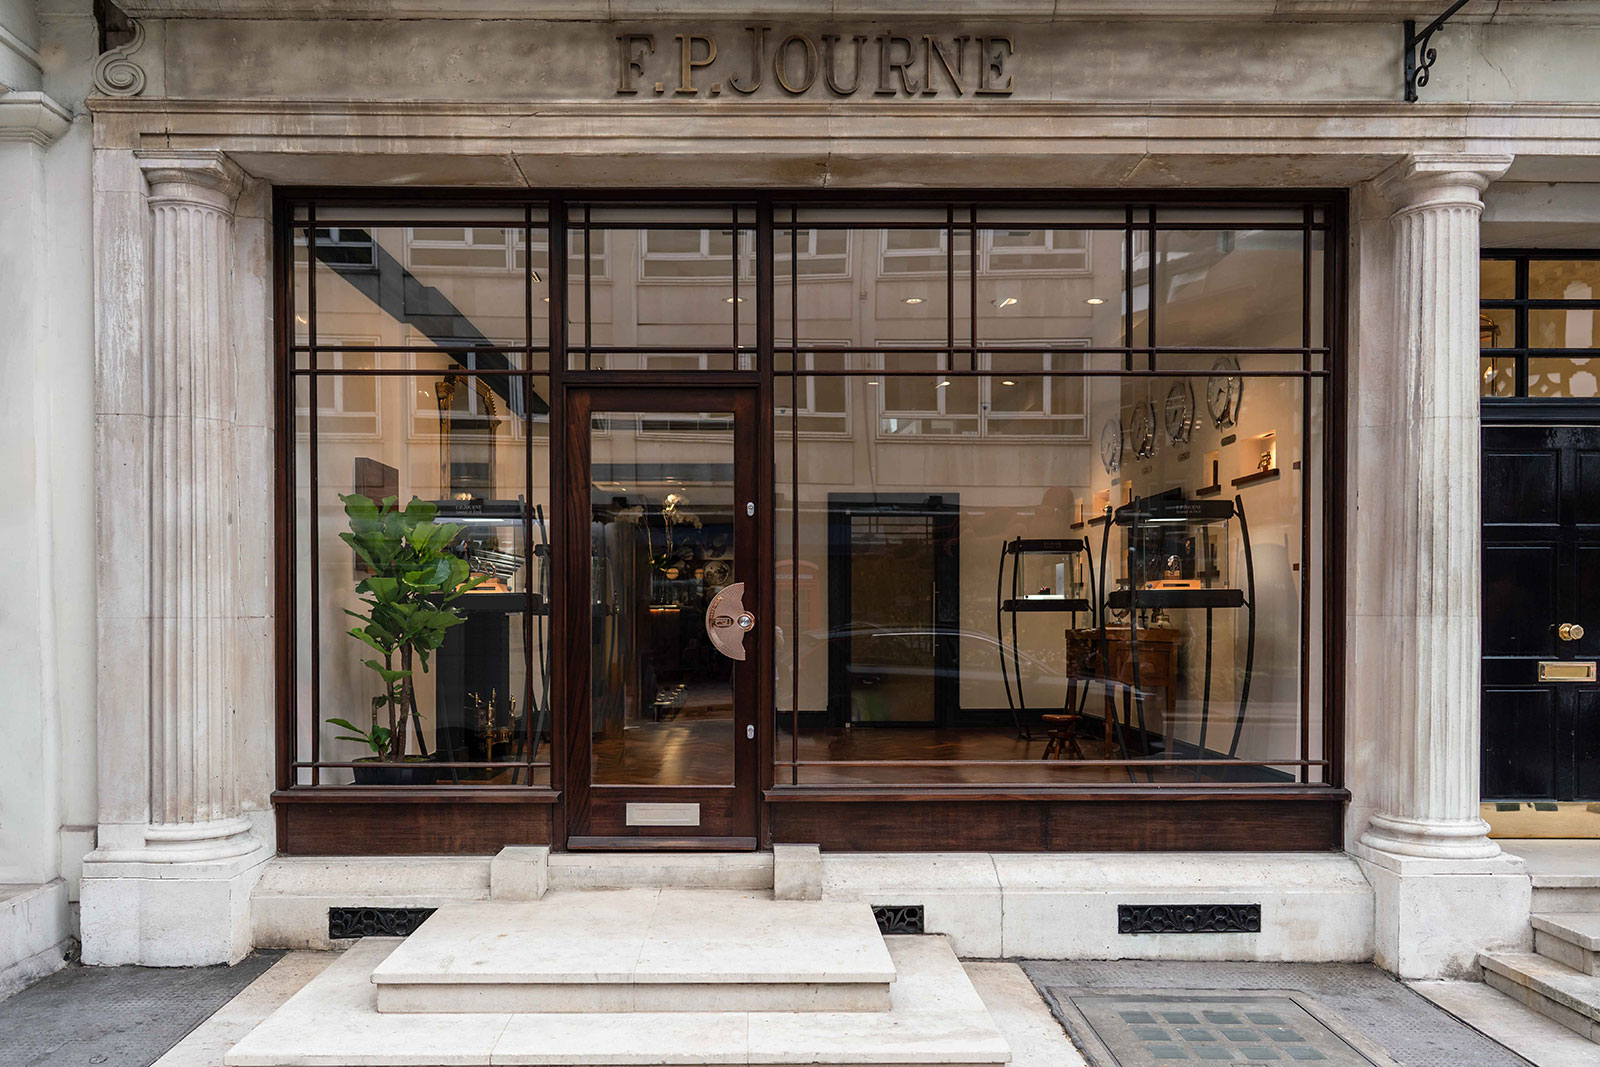 The F.P. Journe London Boutique is Officially Open